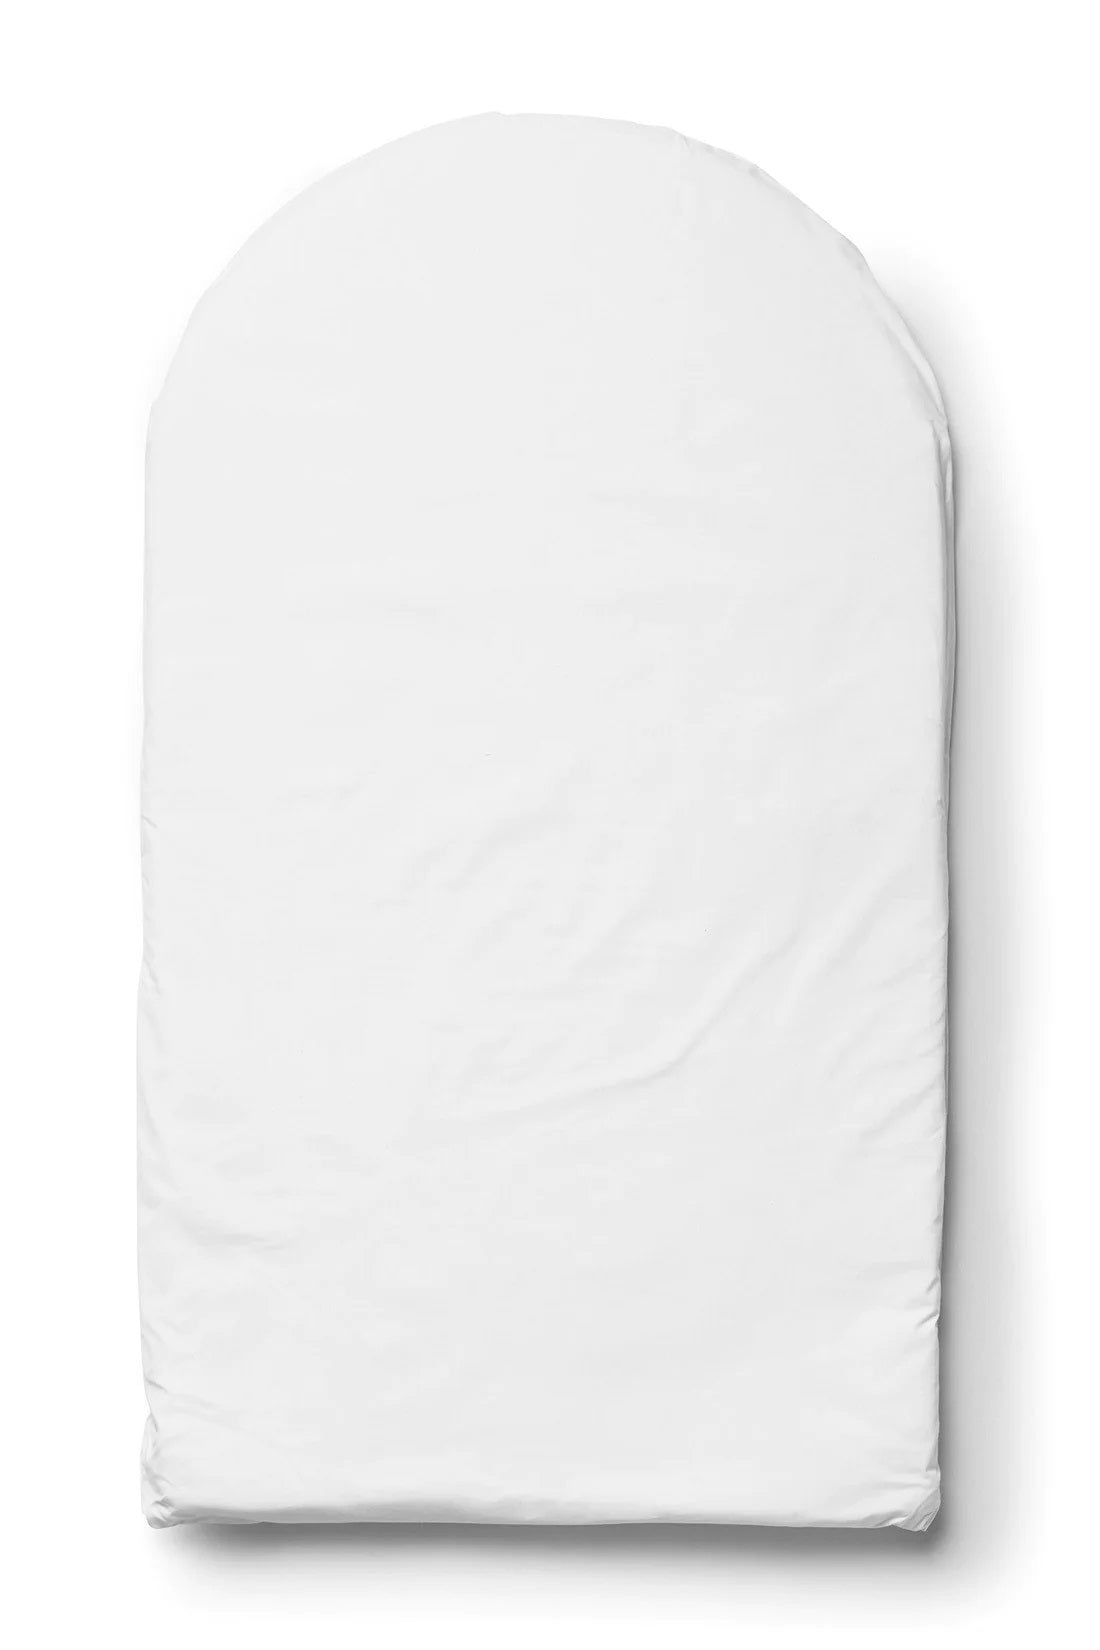 DockATot replacement pad, white color, for Deluxe+ Grand Dock A Tot, front side